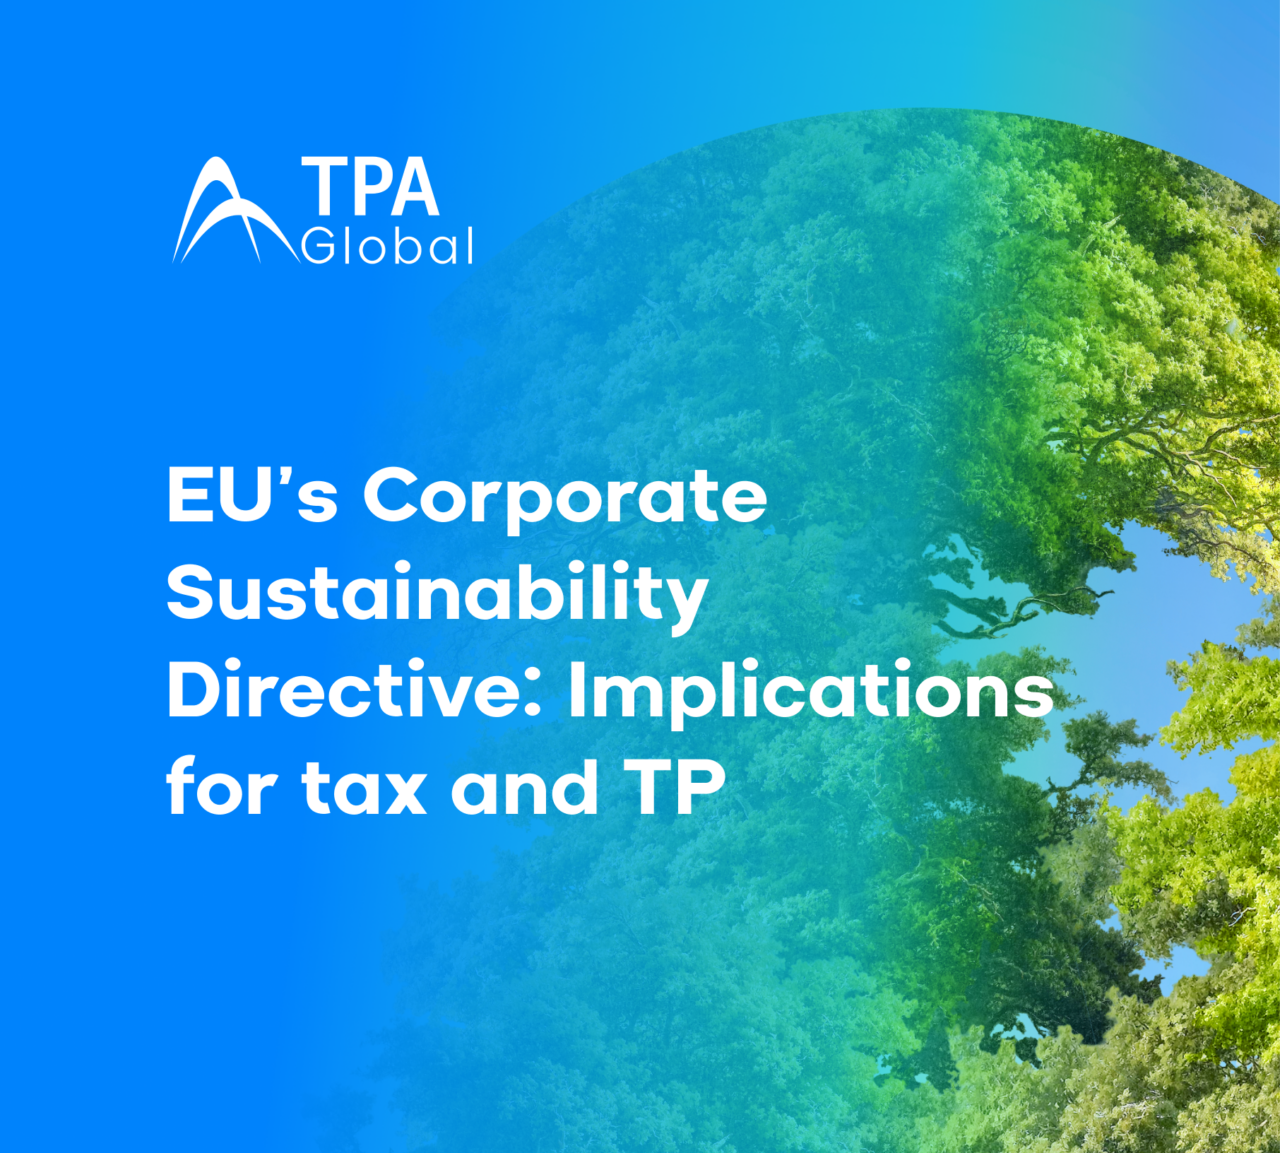 EU’s Corporate Sustainability Directive: Implications for tax and TP